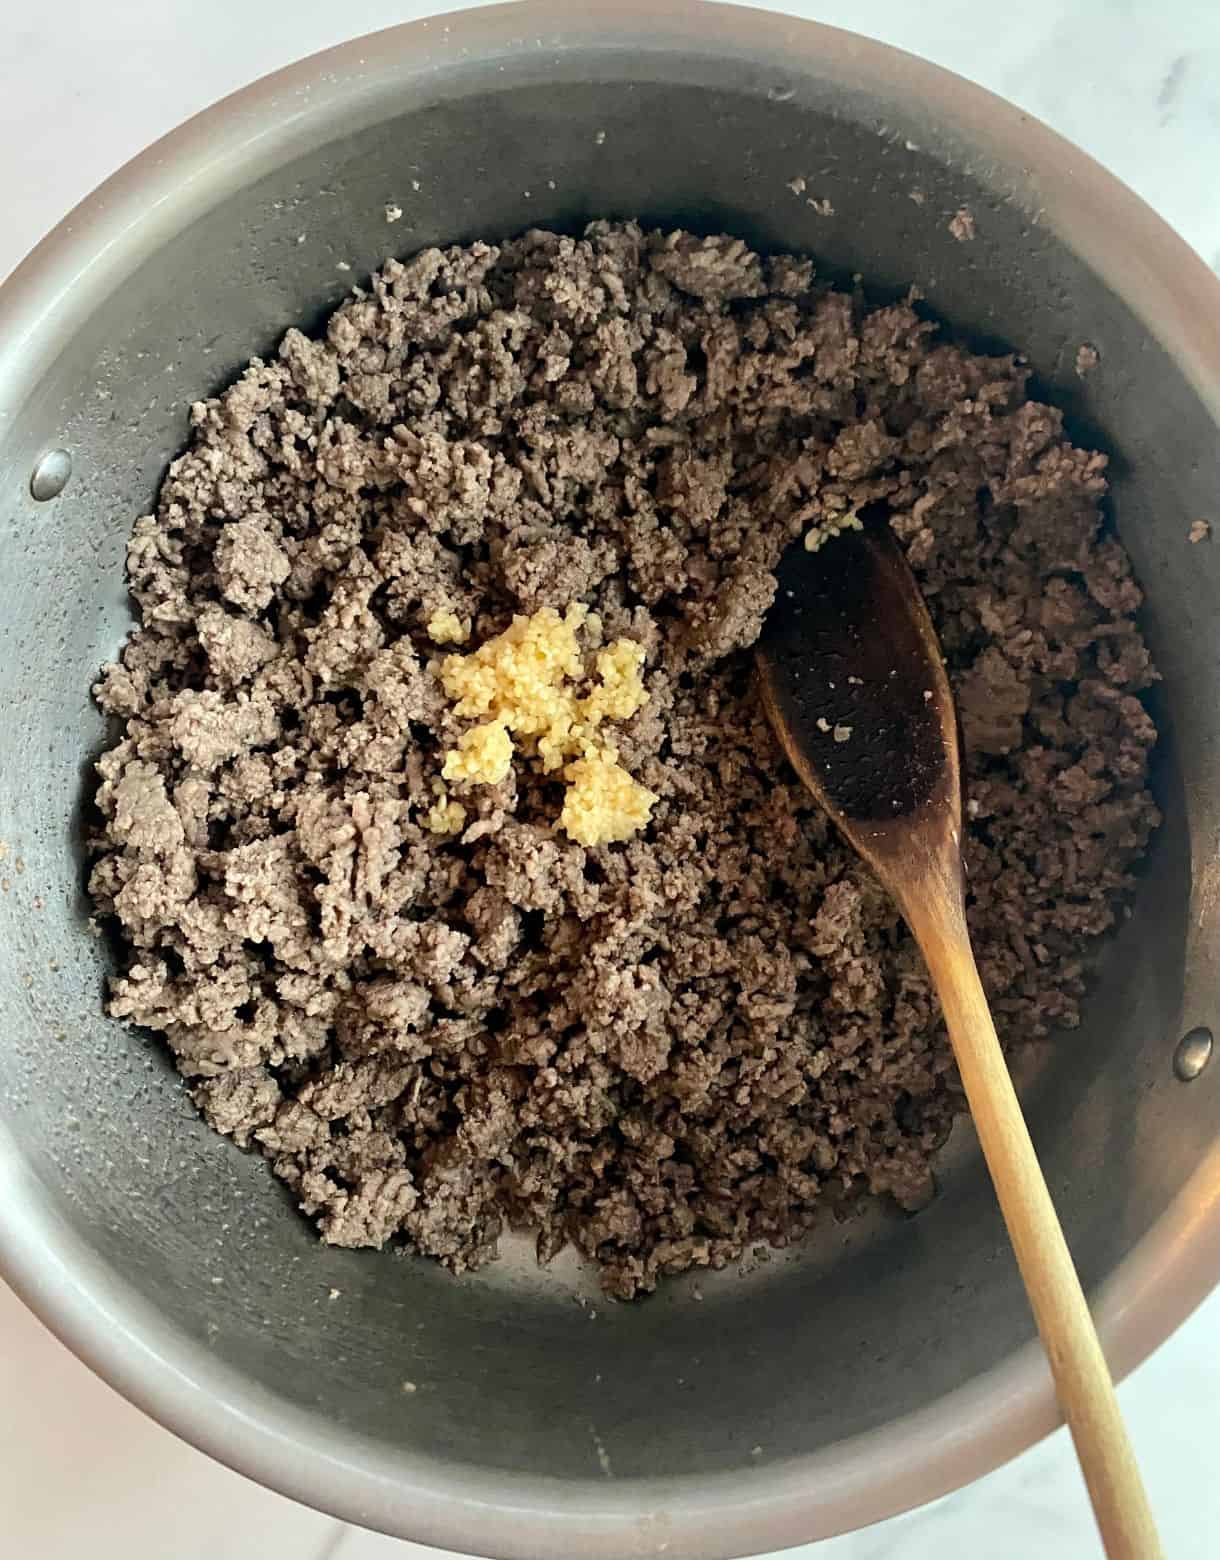 A skillet with cooked and crumbled ground beef and minced garlic added but not stirred.